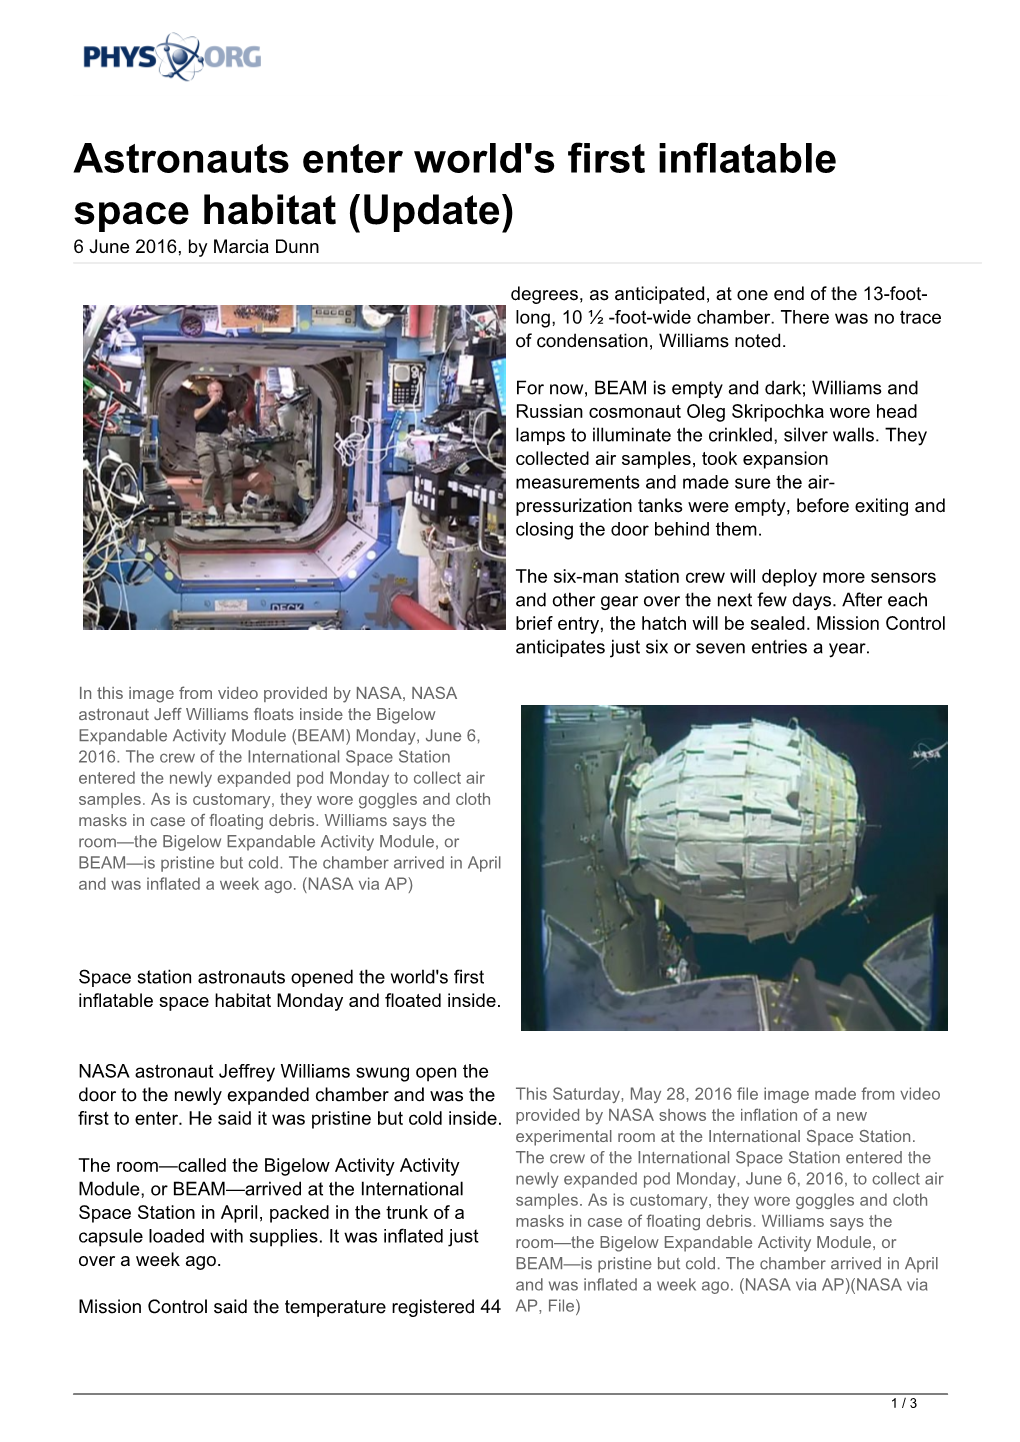 Astronauts Enter World's First Inflatable Space Habitat (Update) 6 June 2016, by Marcia Dunn